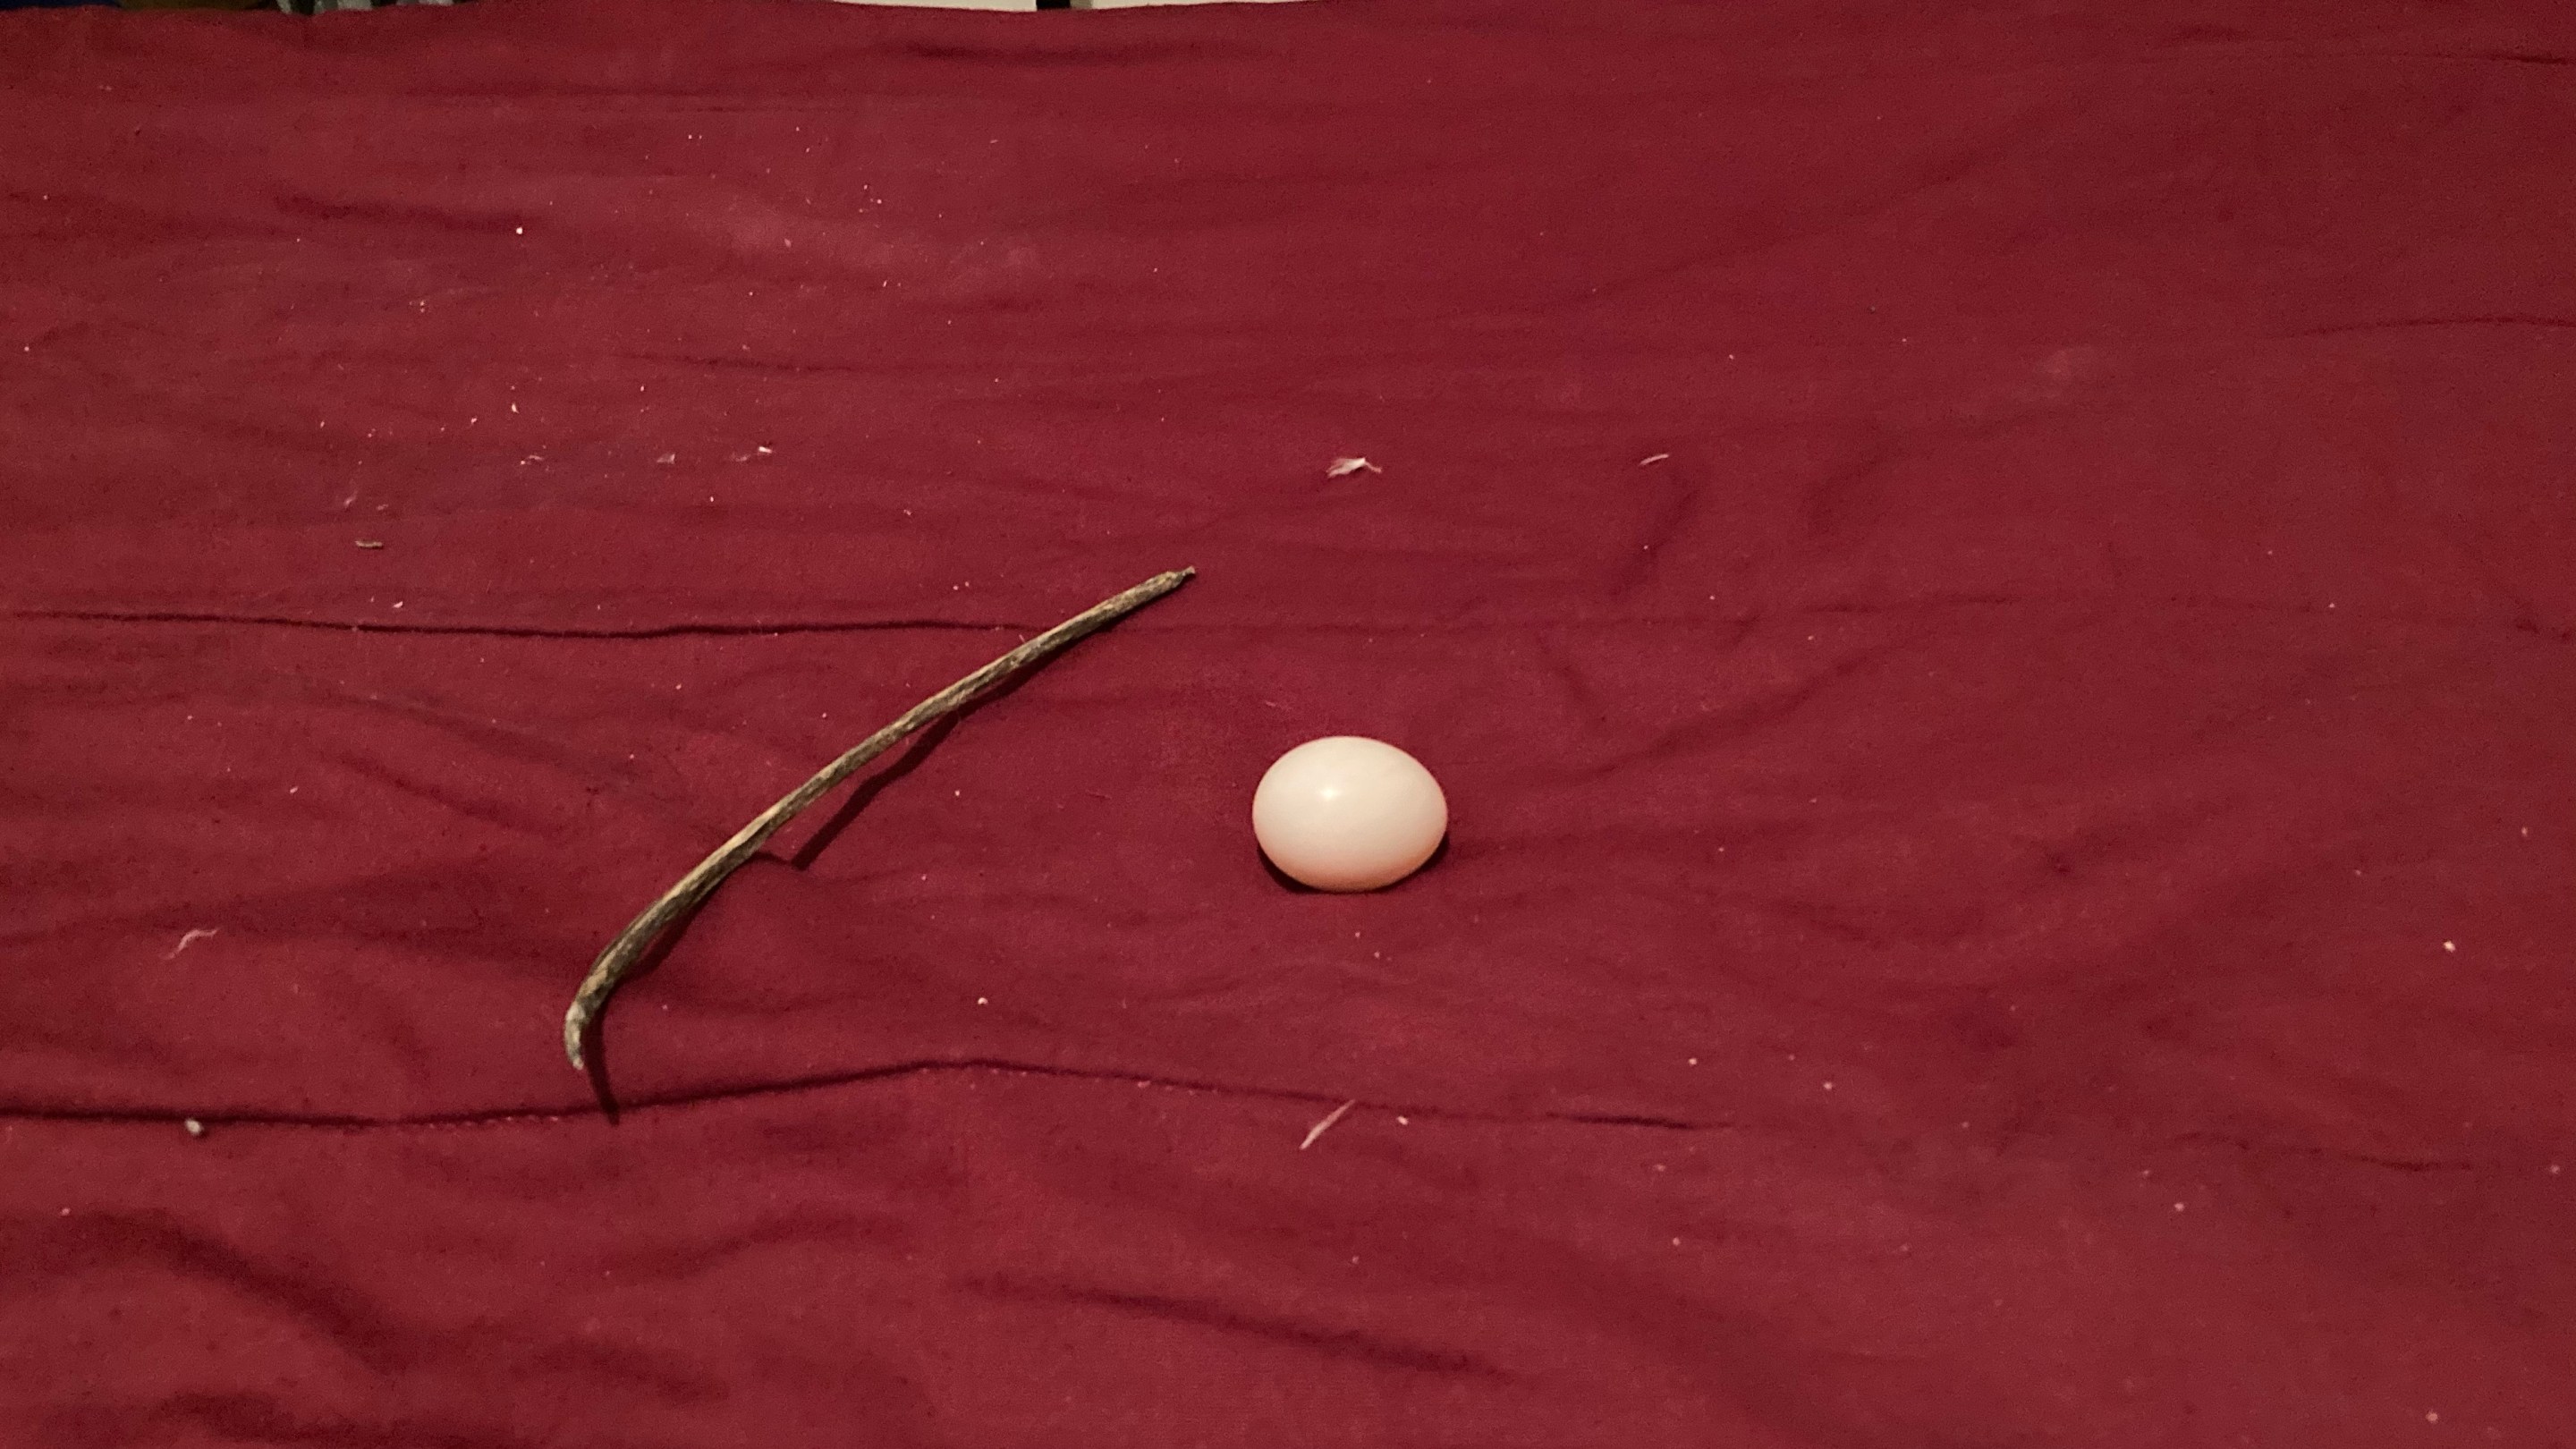 A pigeon nest comprising of a single stick and egg on top of a bed.